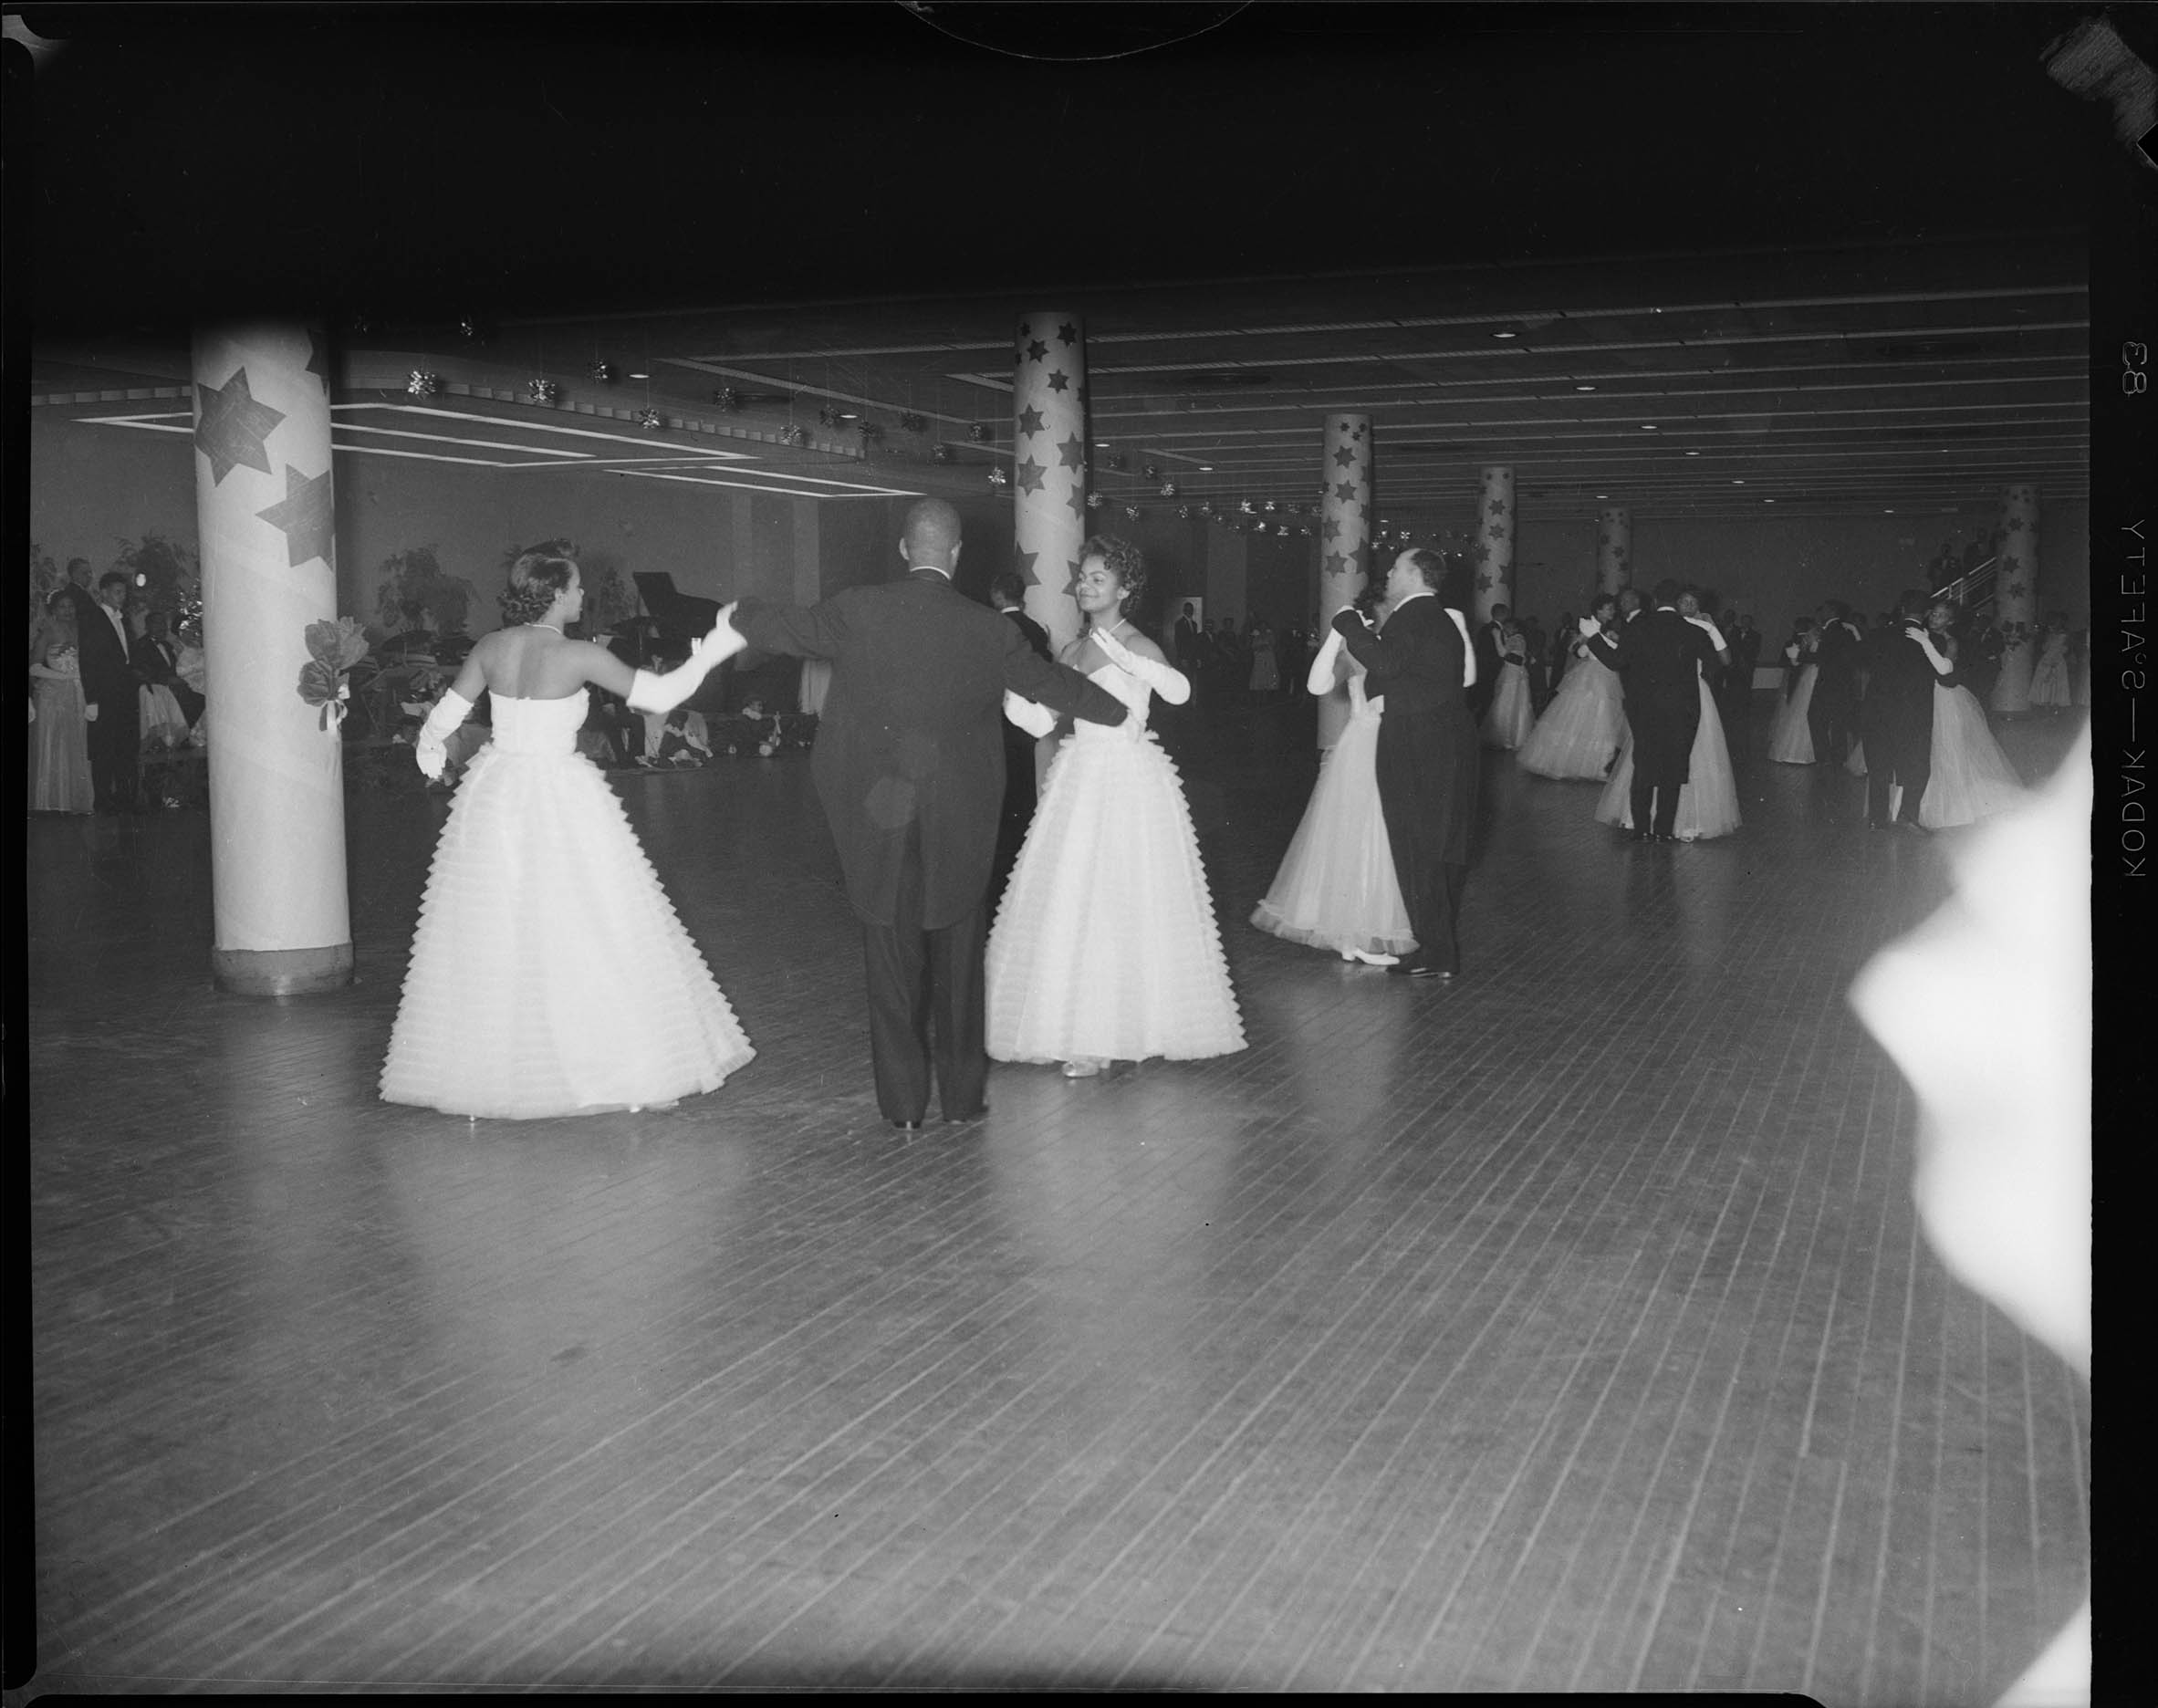 Ballroom, with women in billowing gowns dancing with men in suits